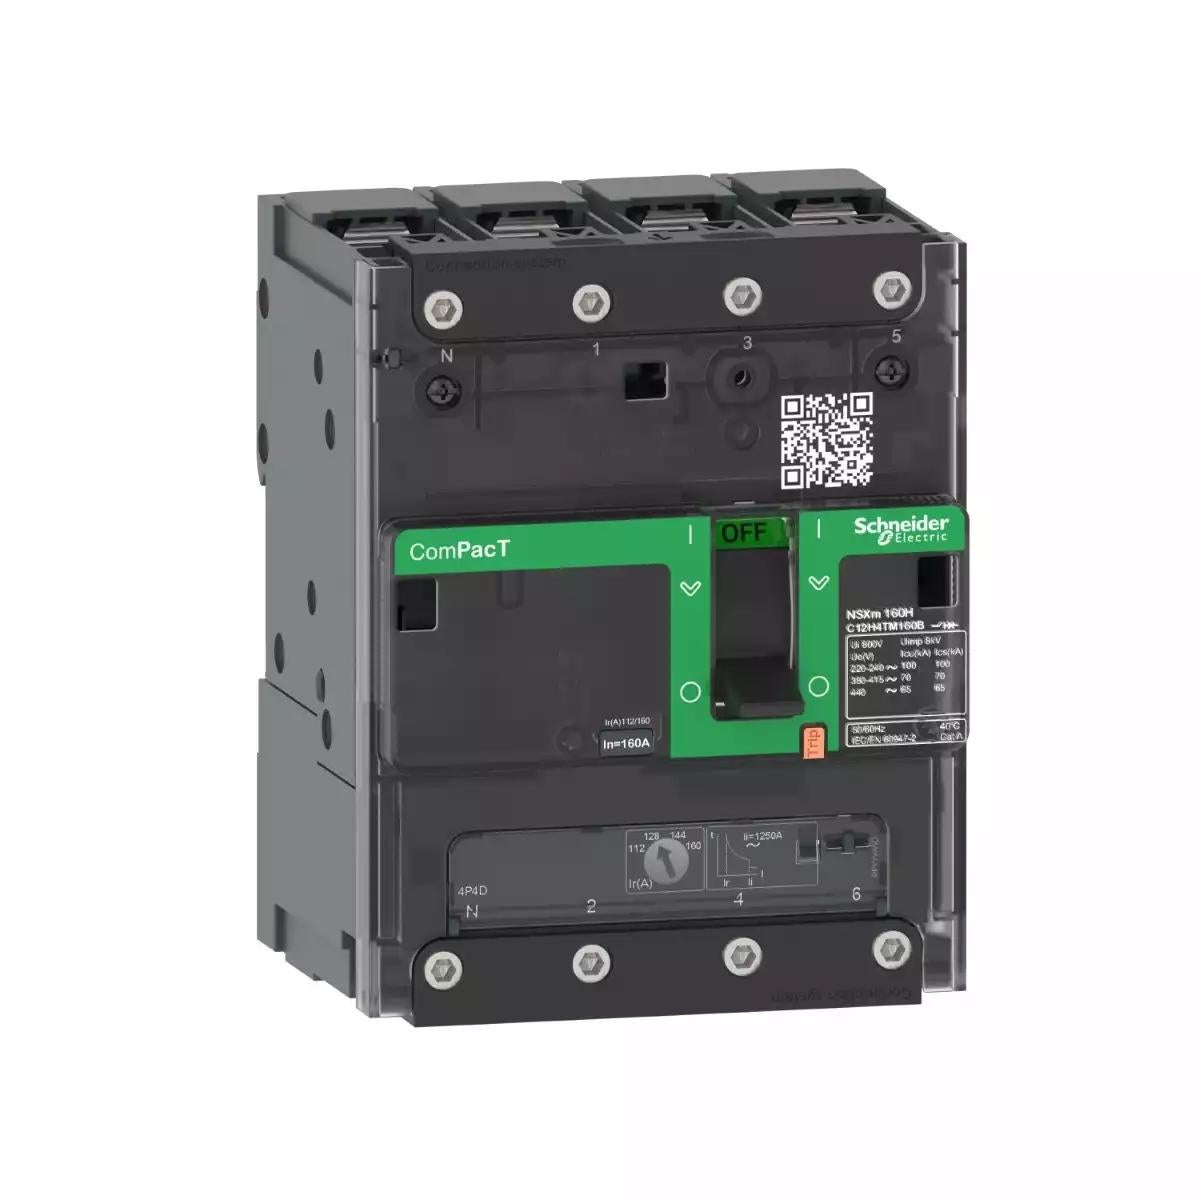 Schneider Electric Circuit breaker ComPacT NSXm N (50kA at 415VAC), 4 Poles 3d, 25A rating TMD trip unit, compression lugs and busbar connectors